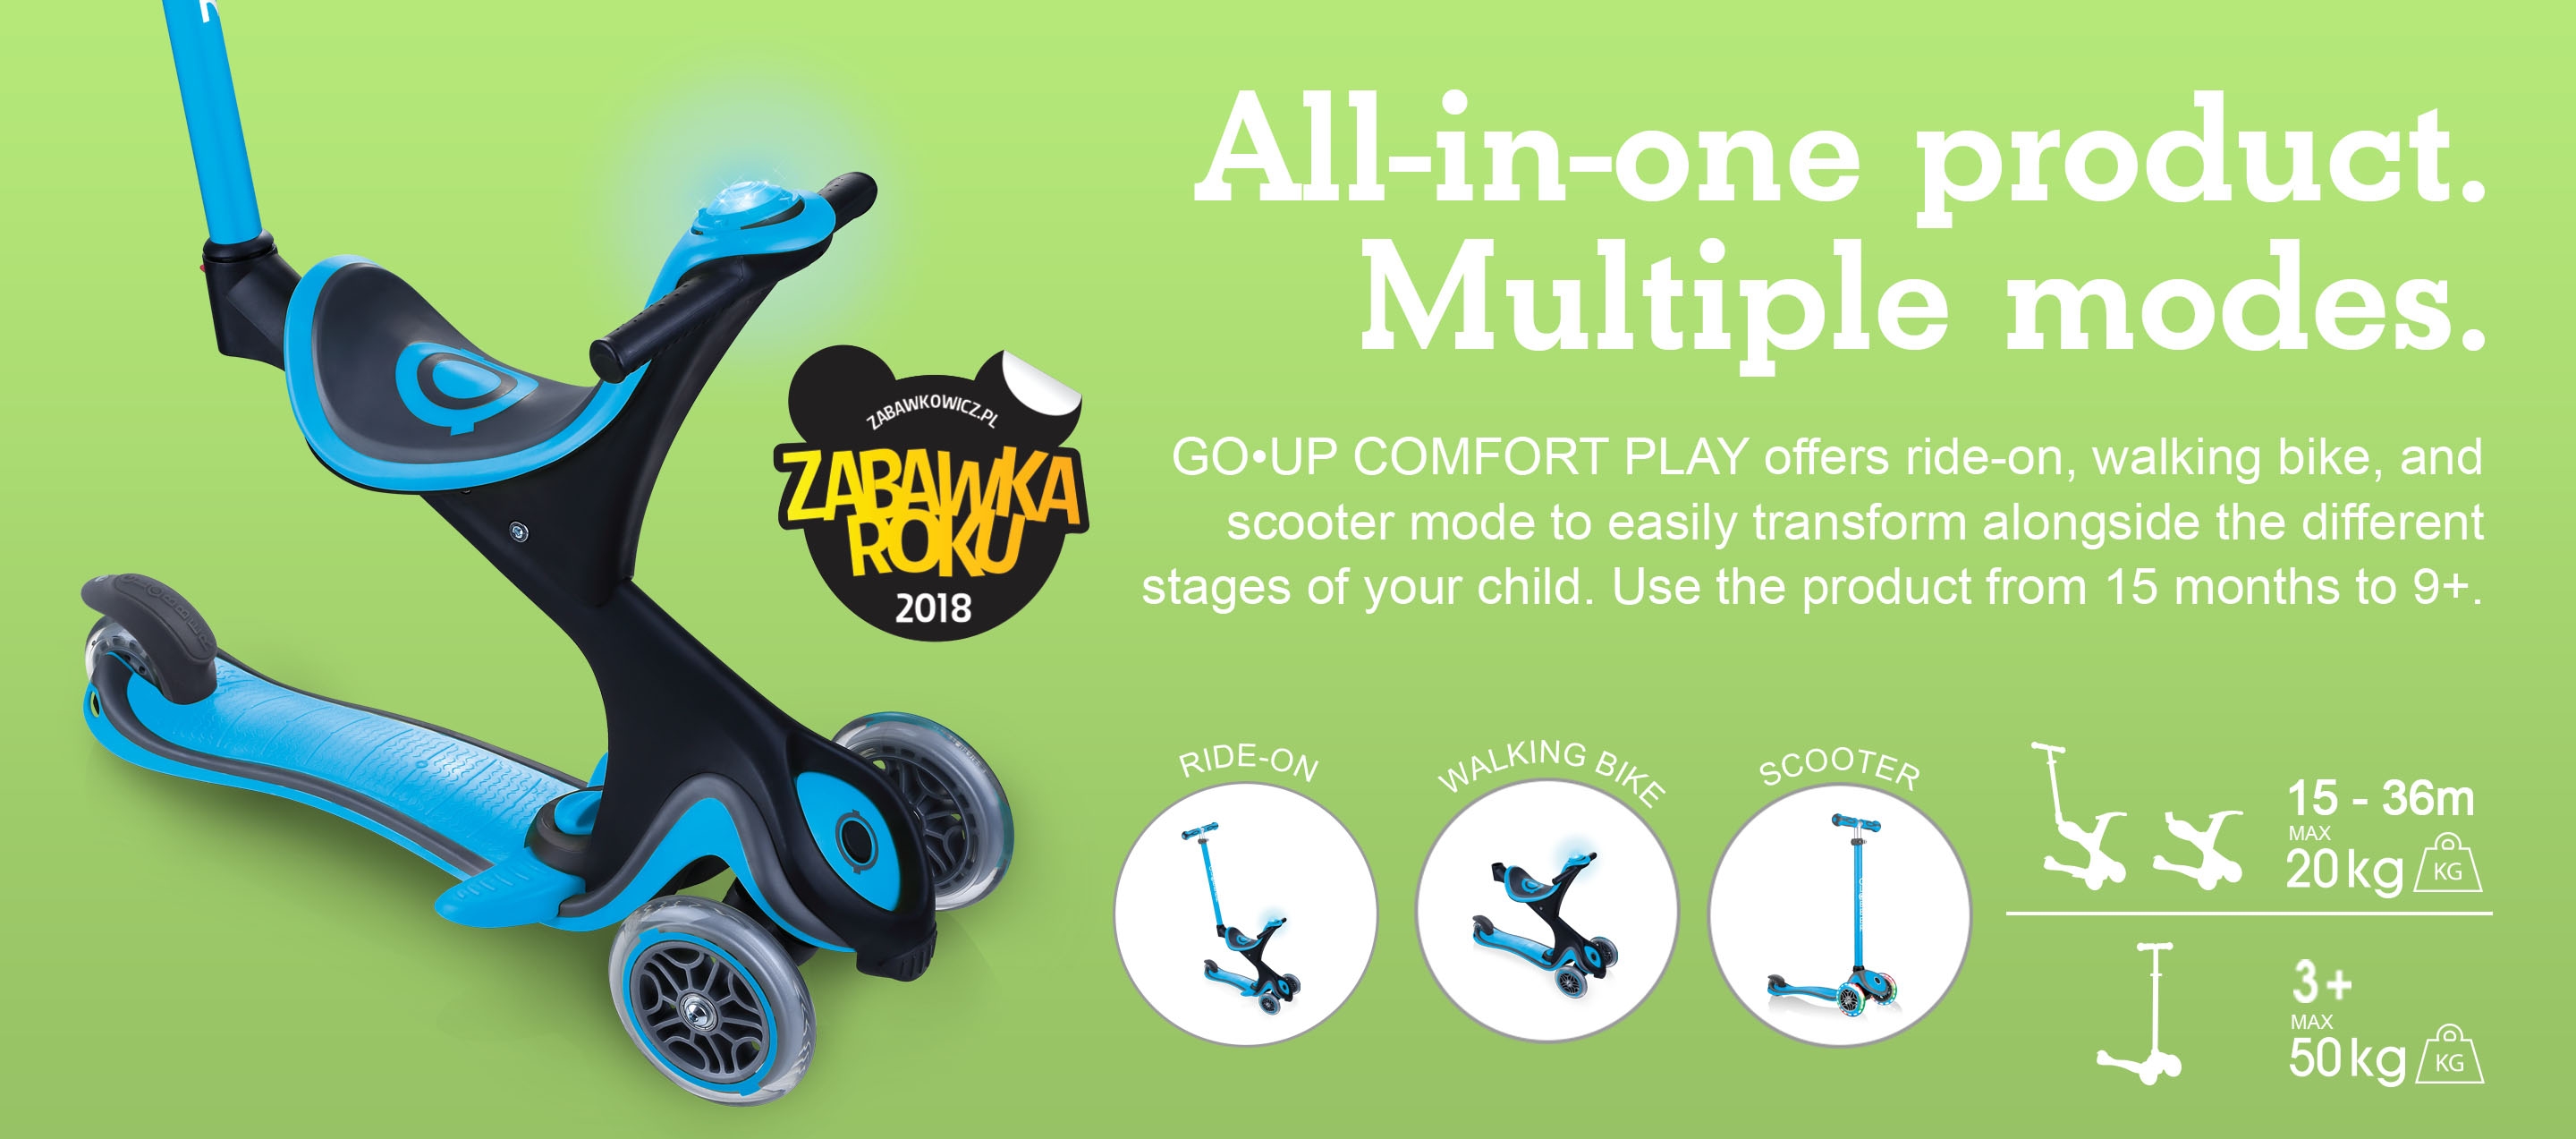 All-in-one product. Multiple modes. 